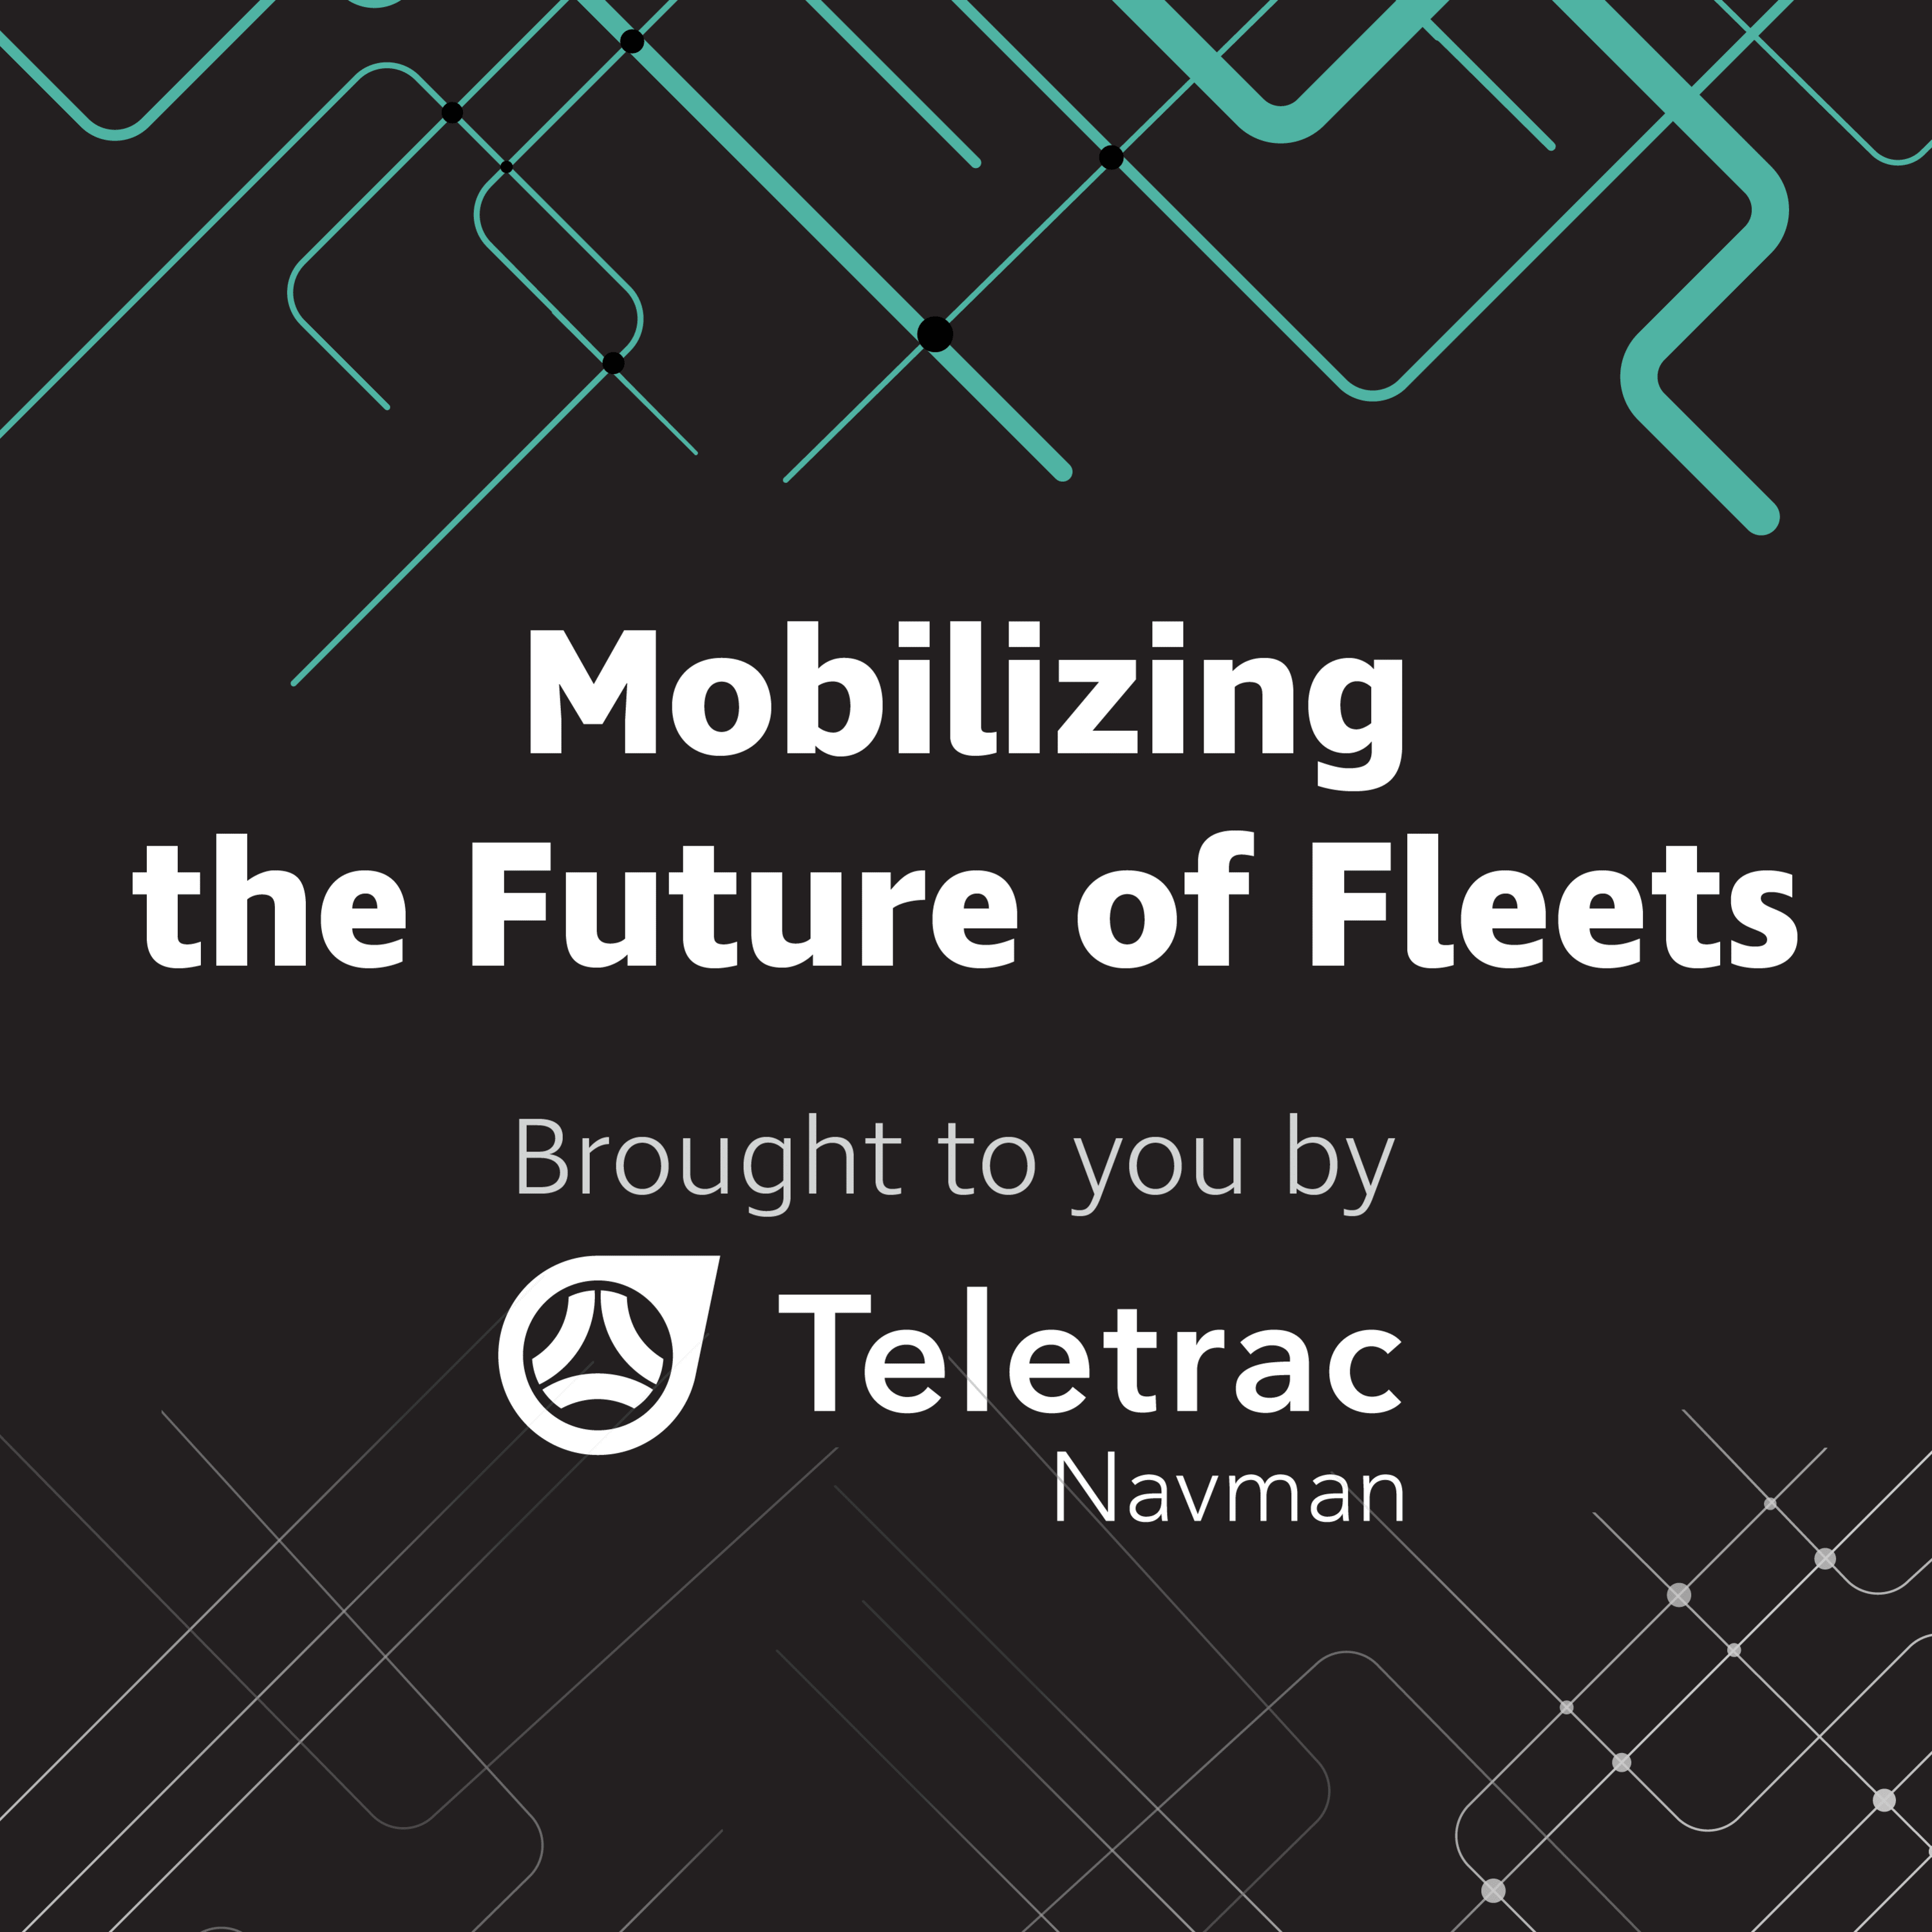 Mobilizing the Future of Fleets